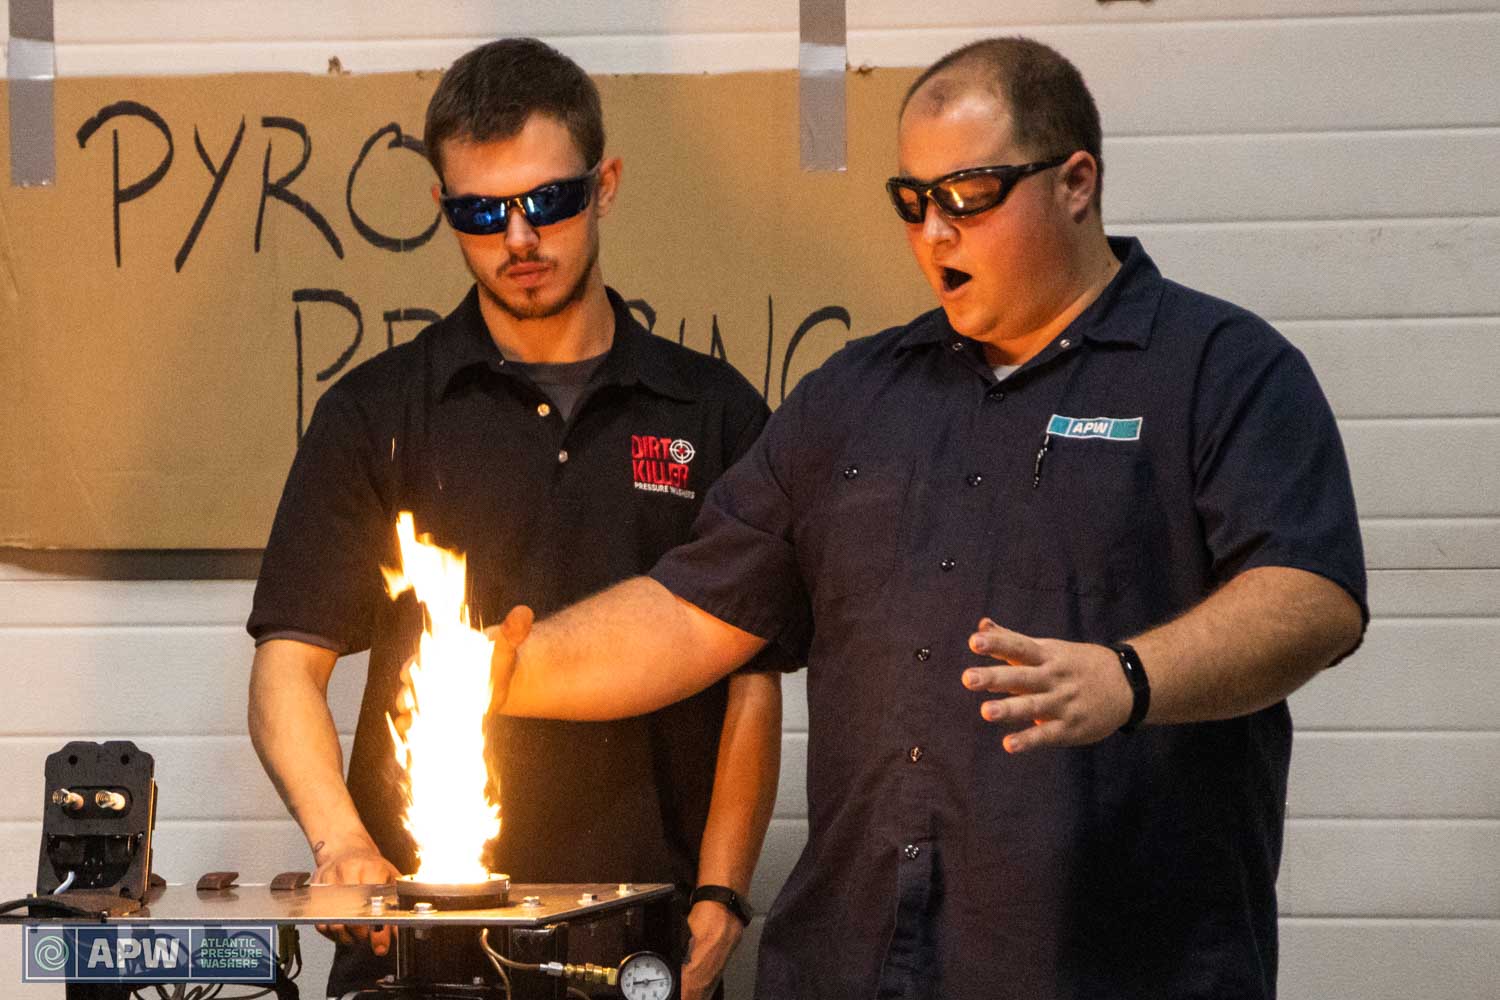 Andrei and Wags demonstrating hot water pressure washer flame